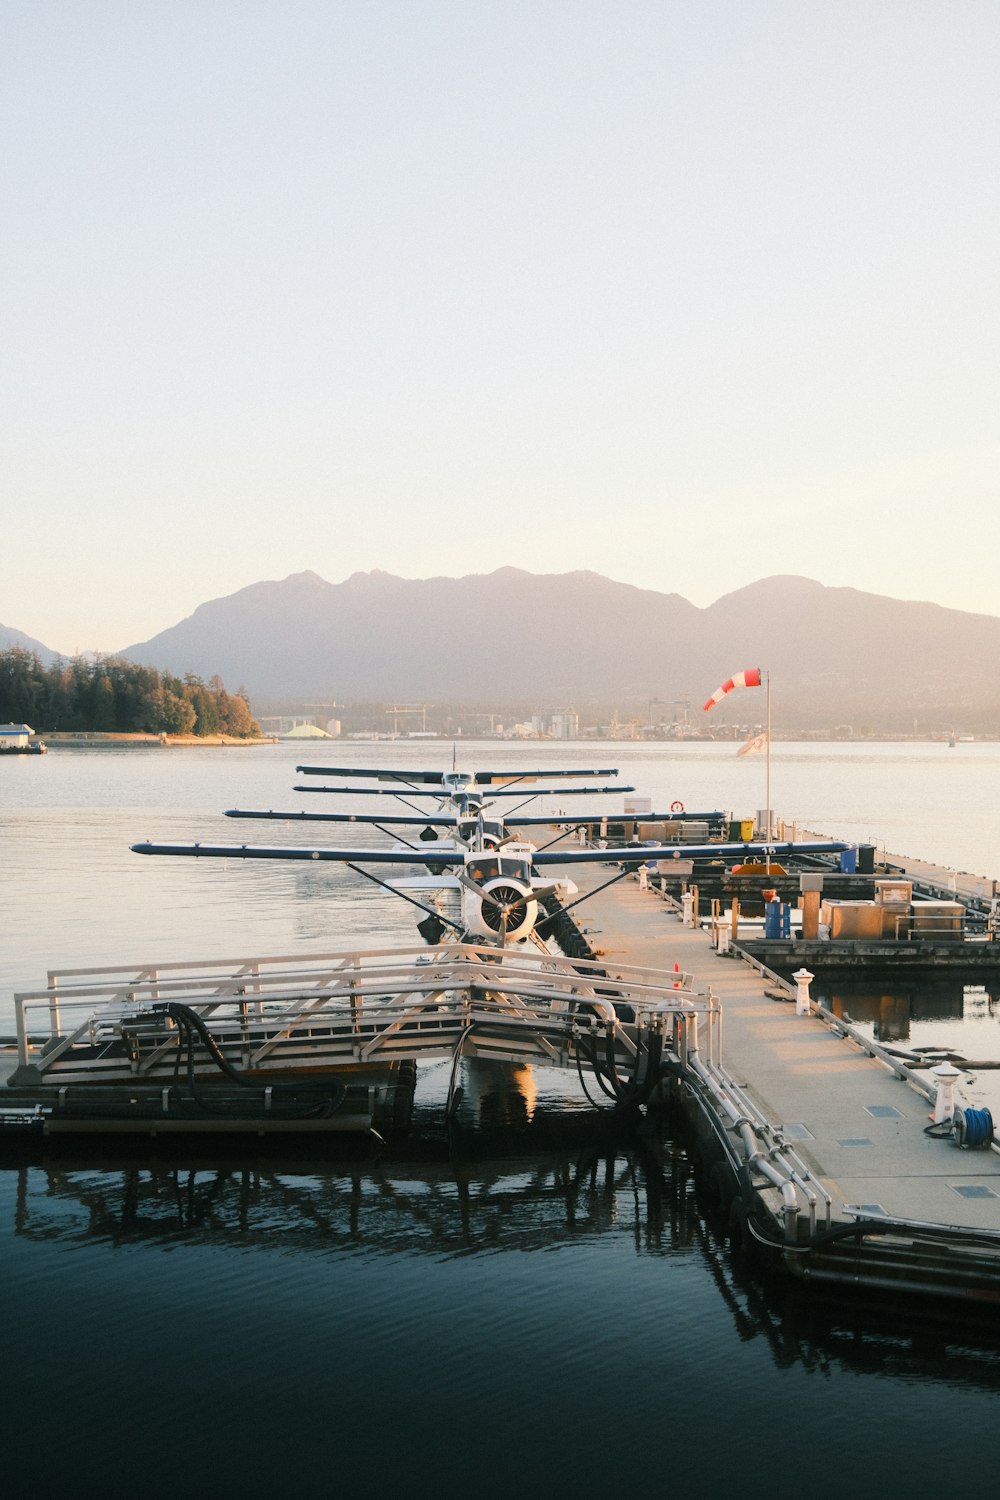 a small plane is parked at a dock